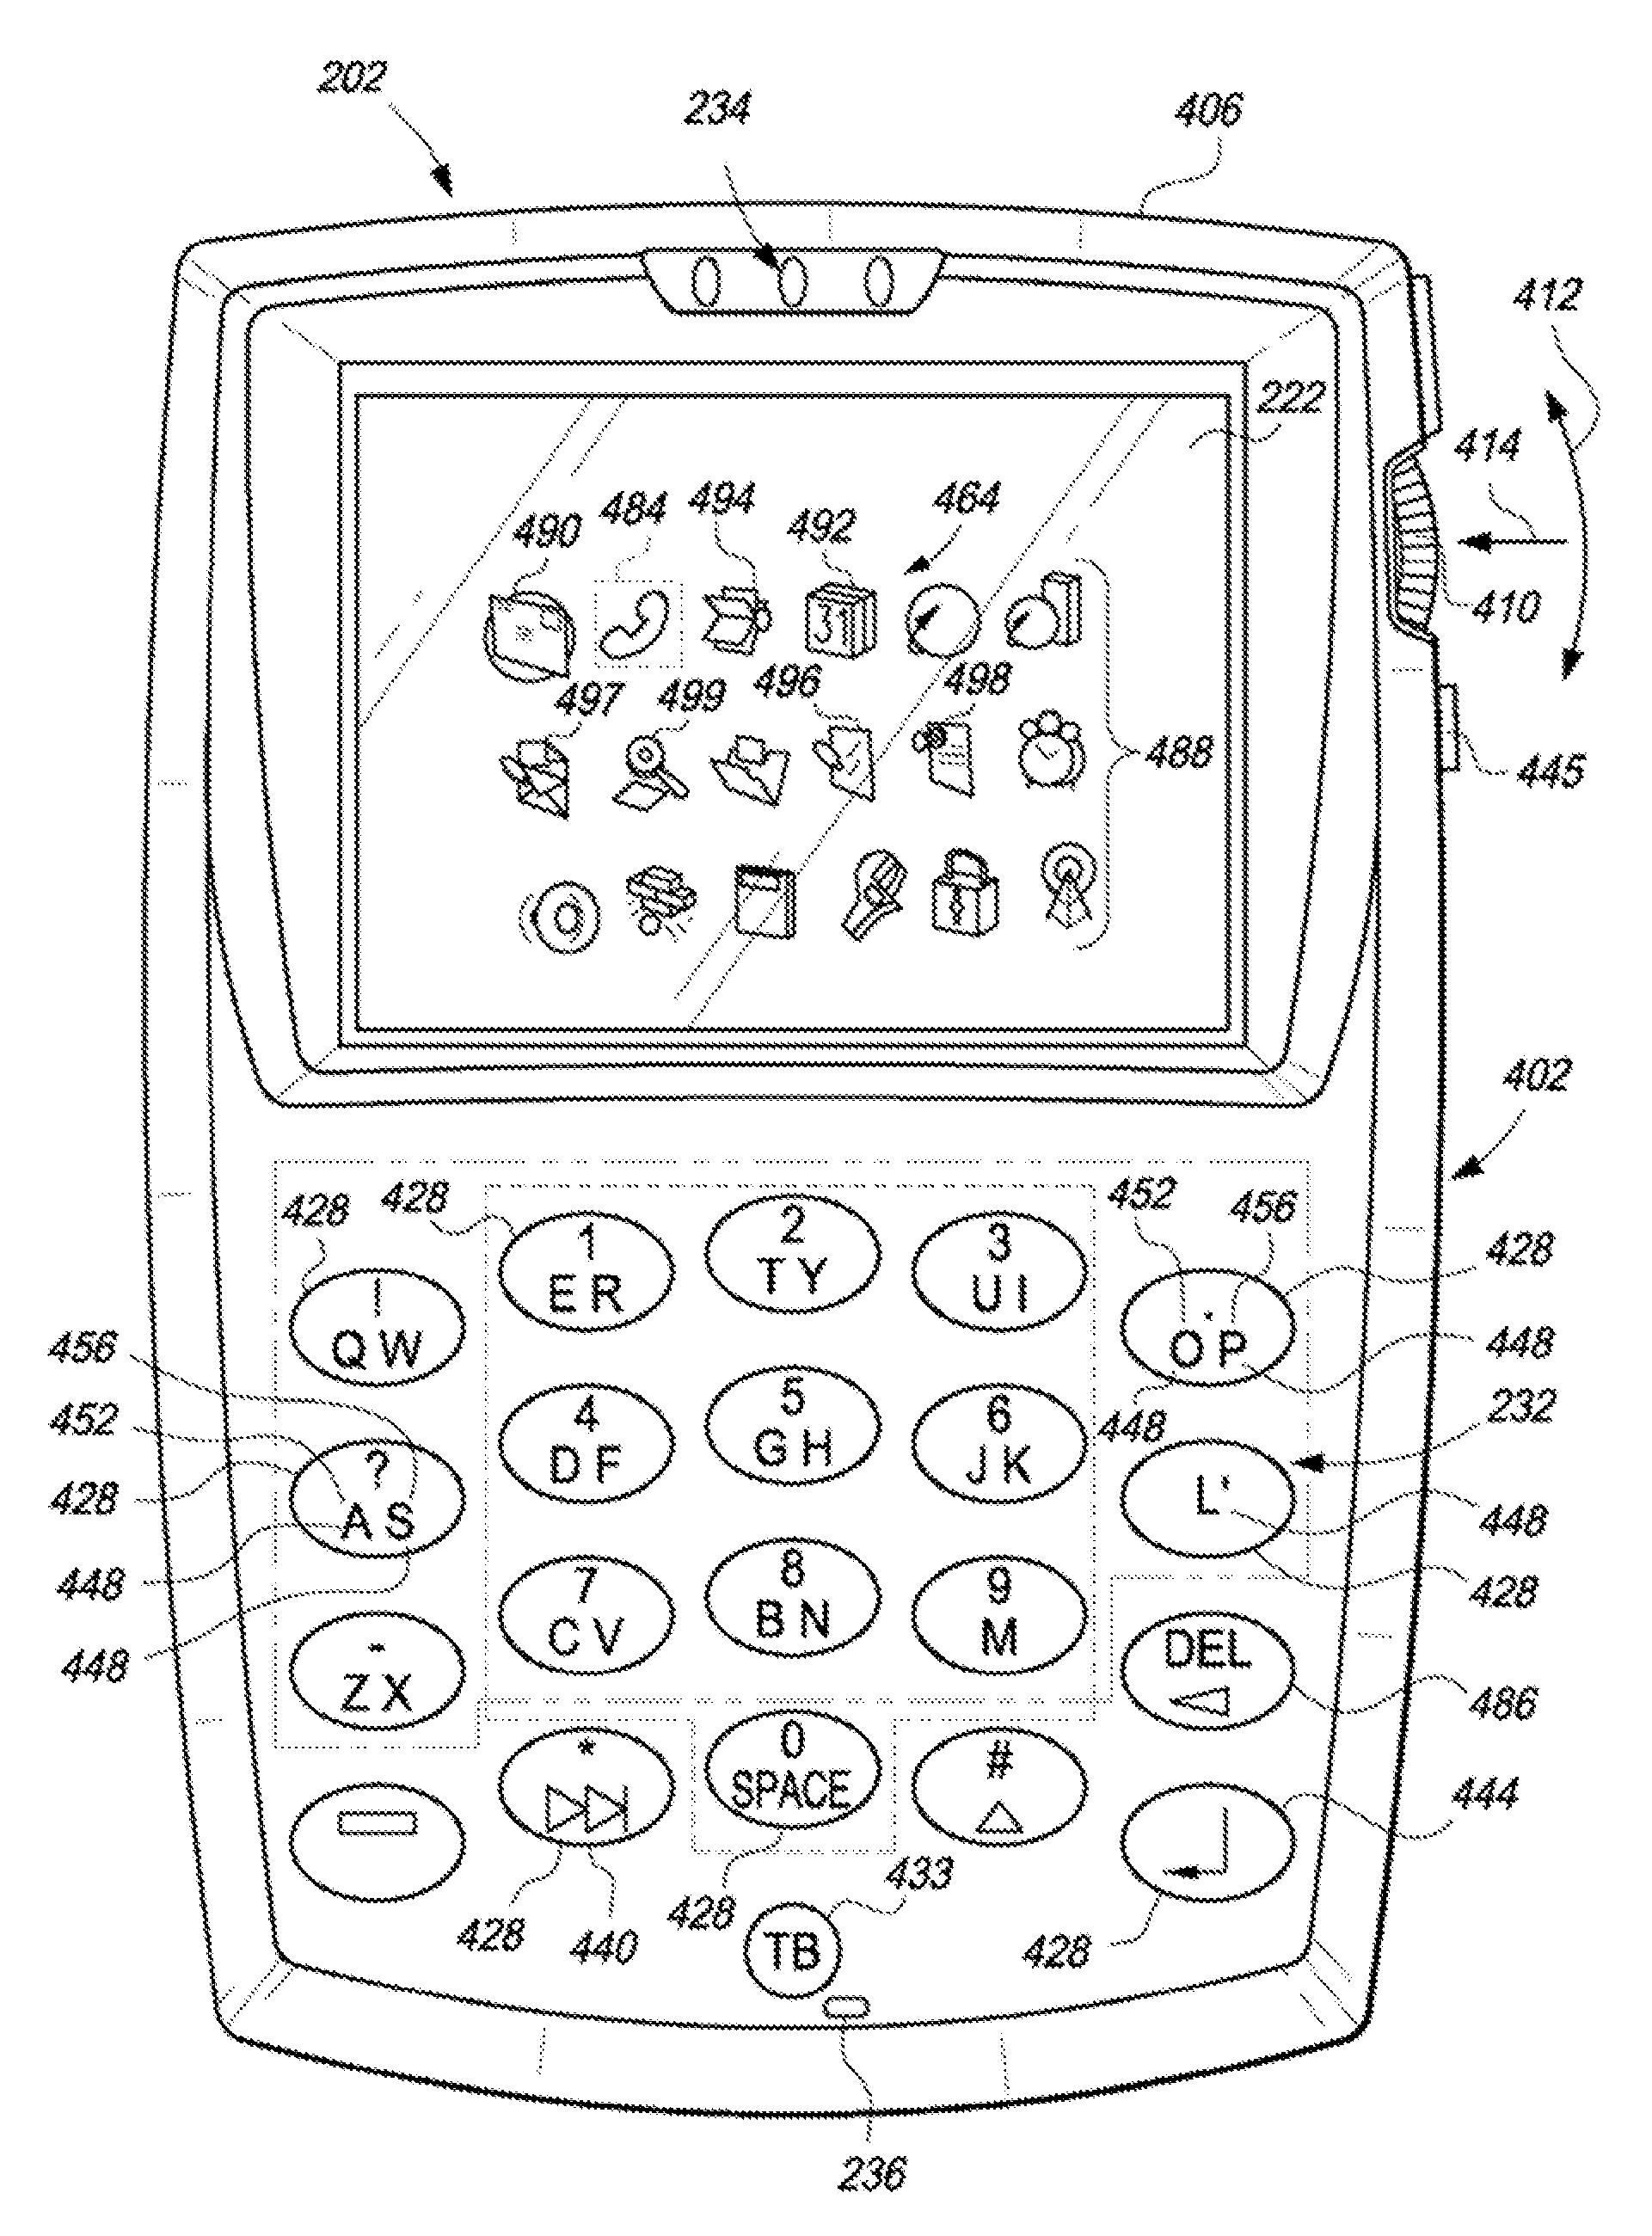 Methods And Apparatus For Associating Mapping Functionality And Information In Contact Lists Of Mobile Communication Devices